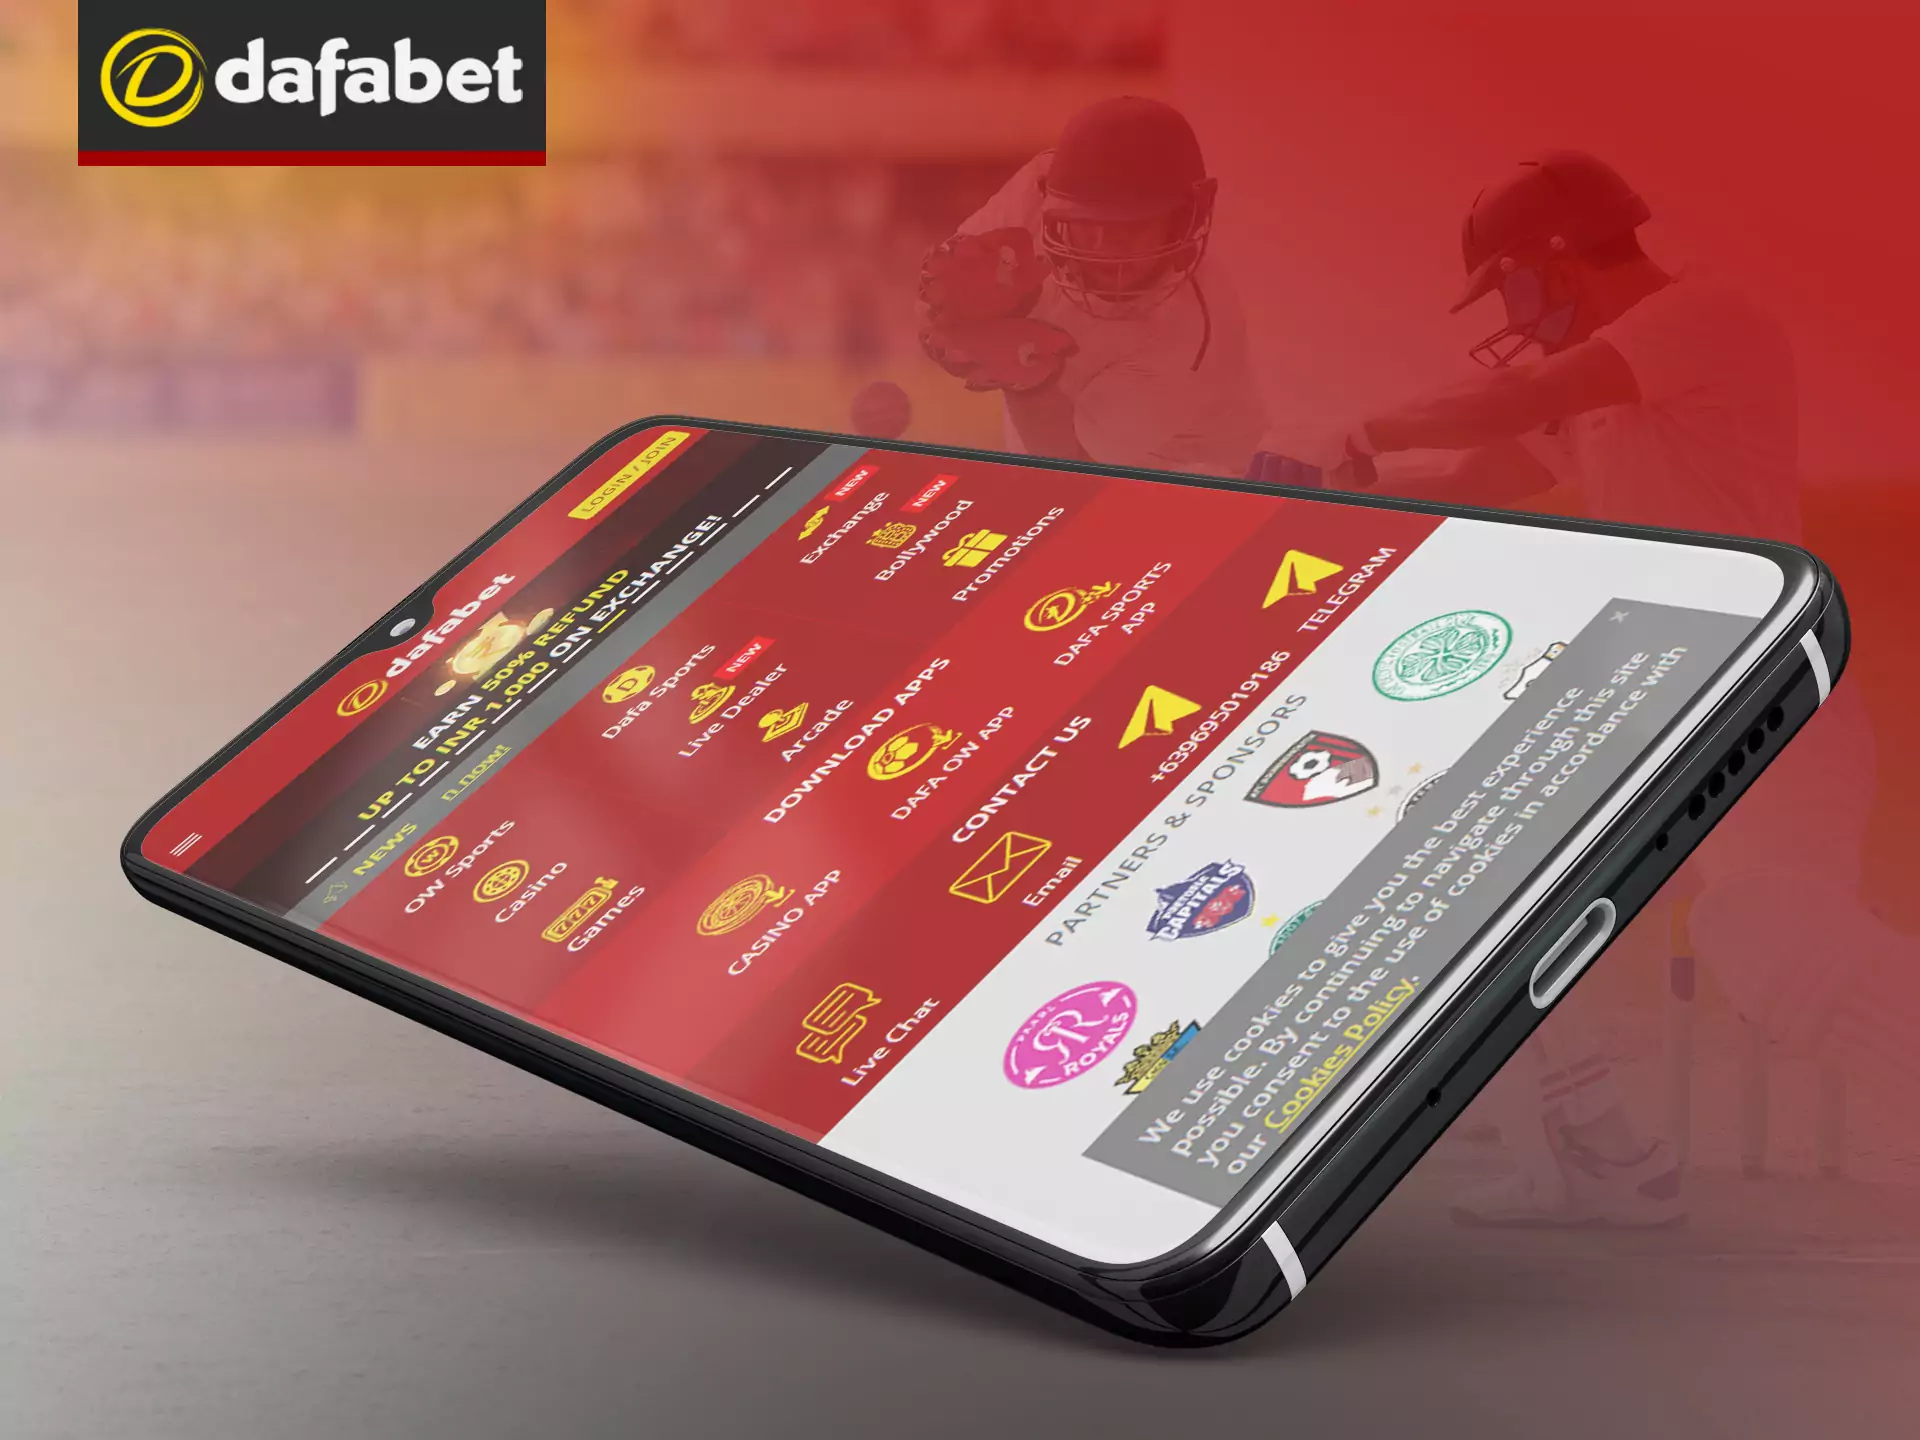 You can also bet on Dafabet on your device on the official mobile site.